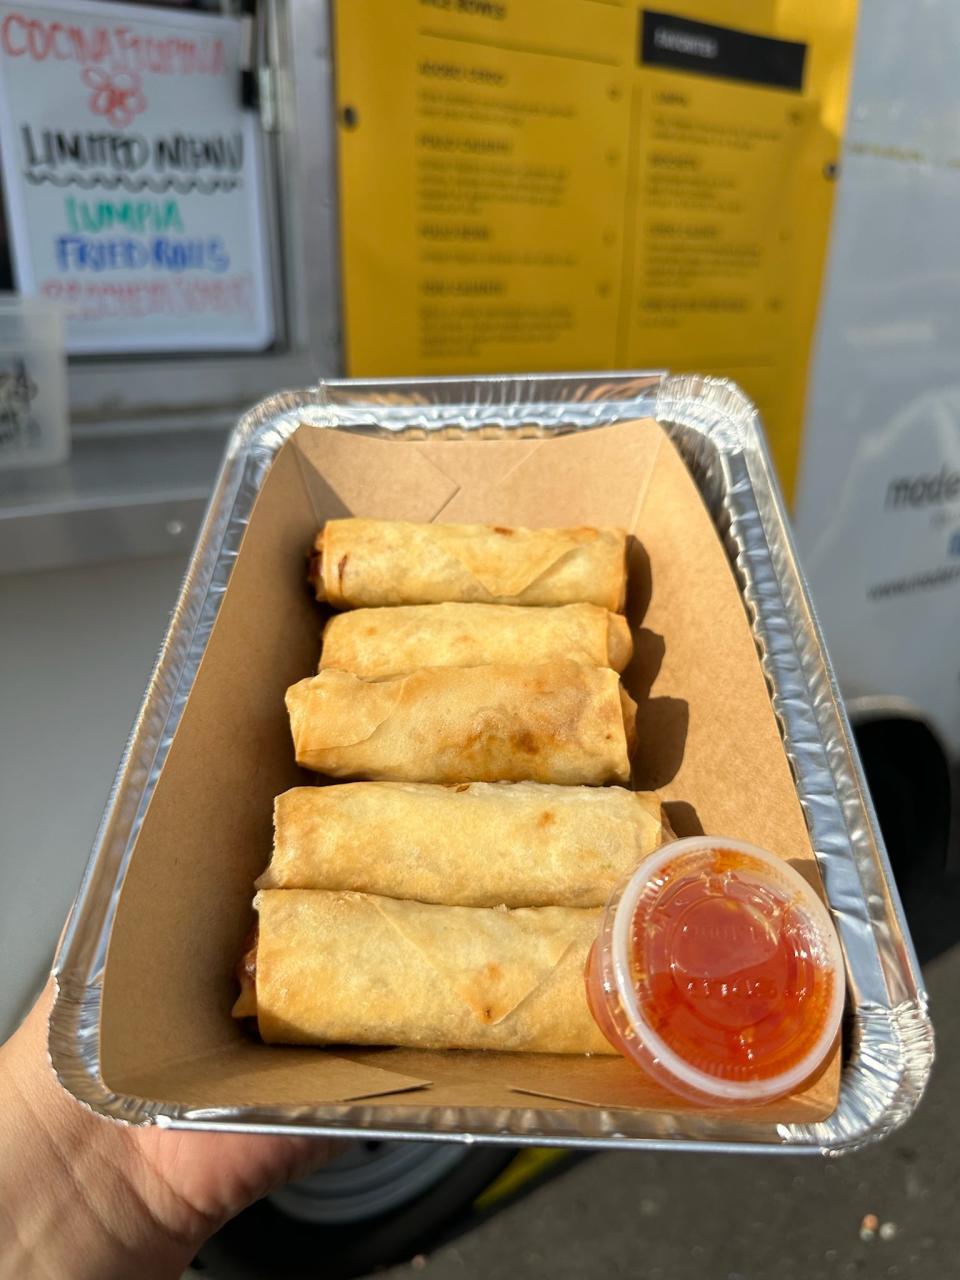 Cocina Filipina fills a Filipino food hole in Milwaukee after Meat on the Street closed, offering fried rolls, lumpia and more.